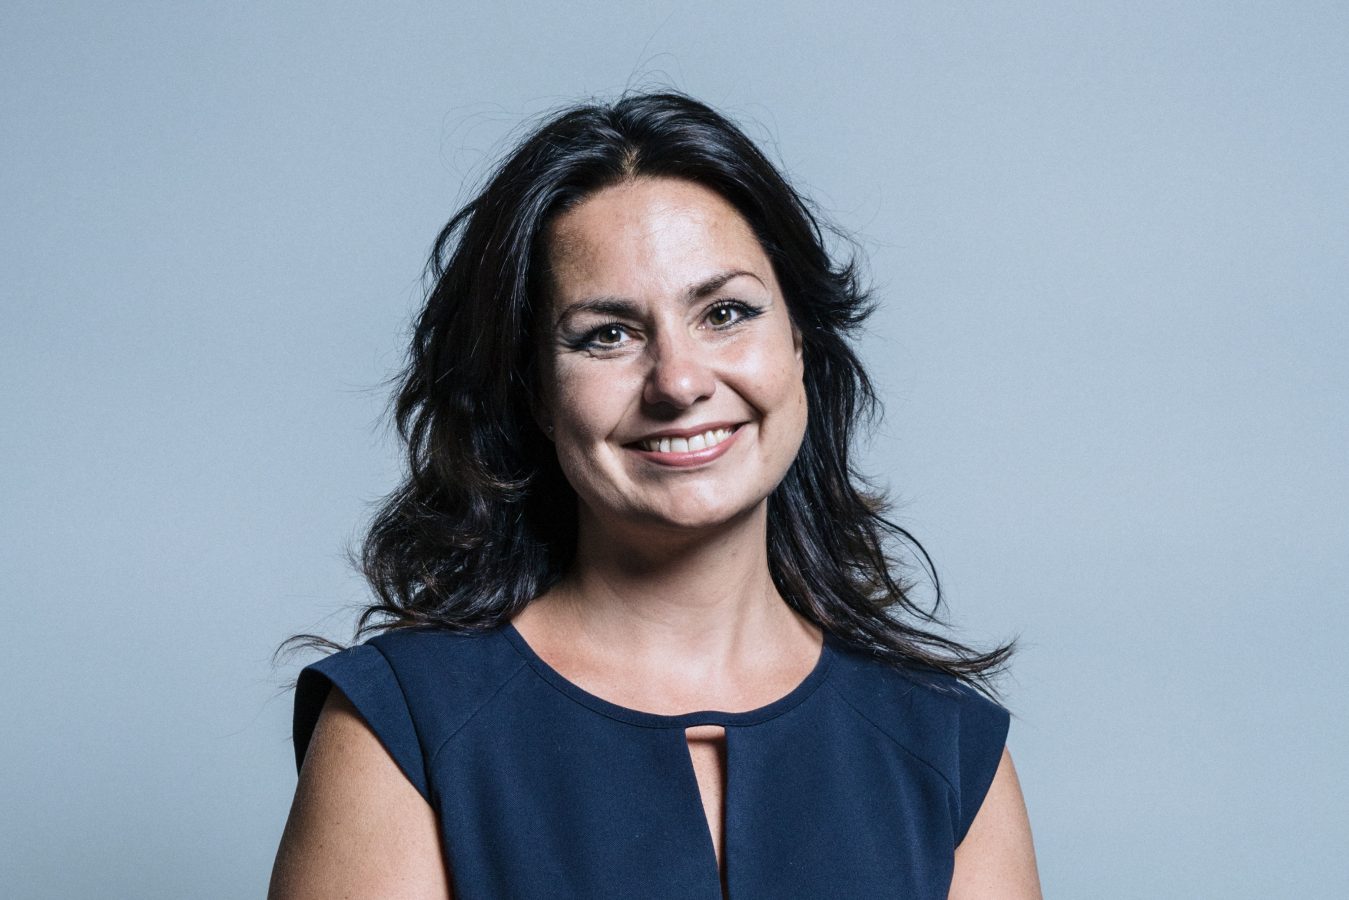 Change UK Party may not exist by next election reveals leader Heidi Allen